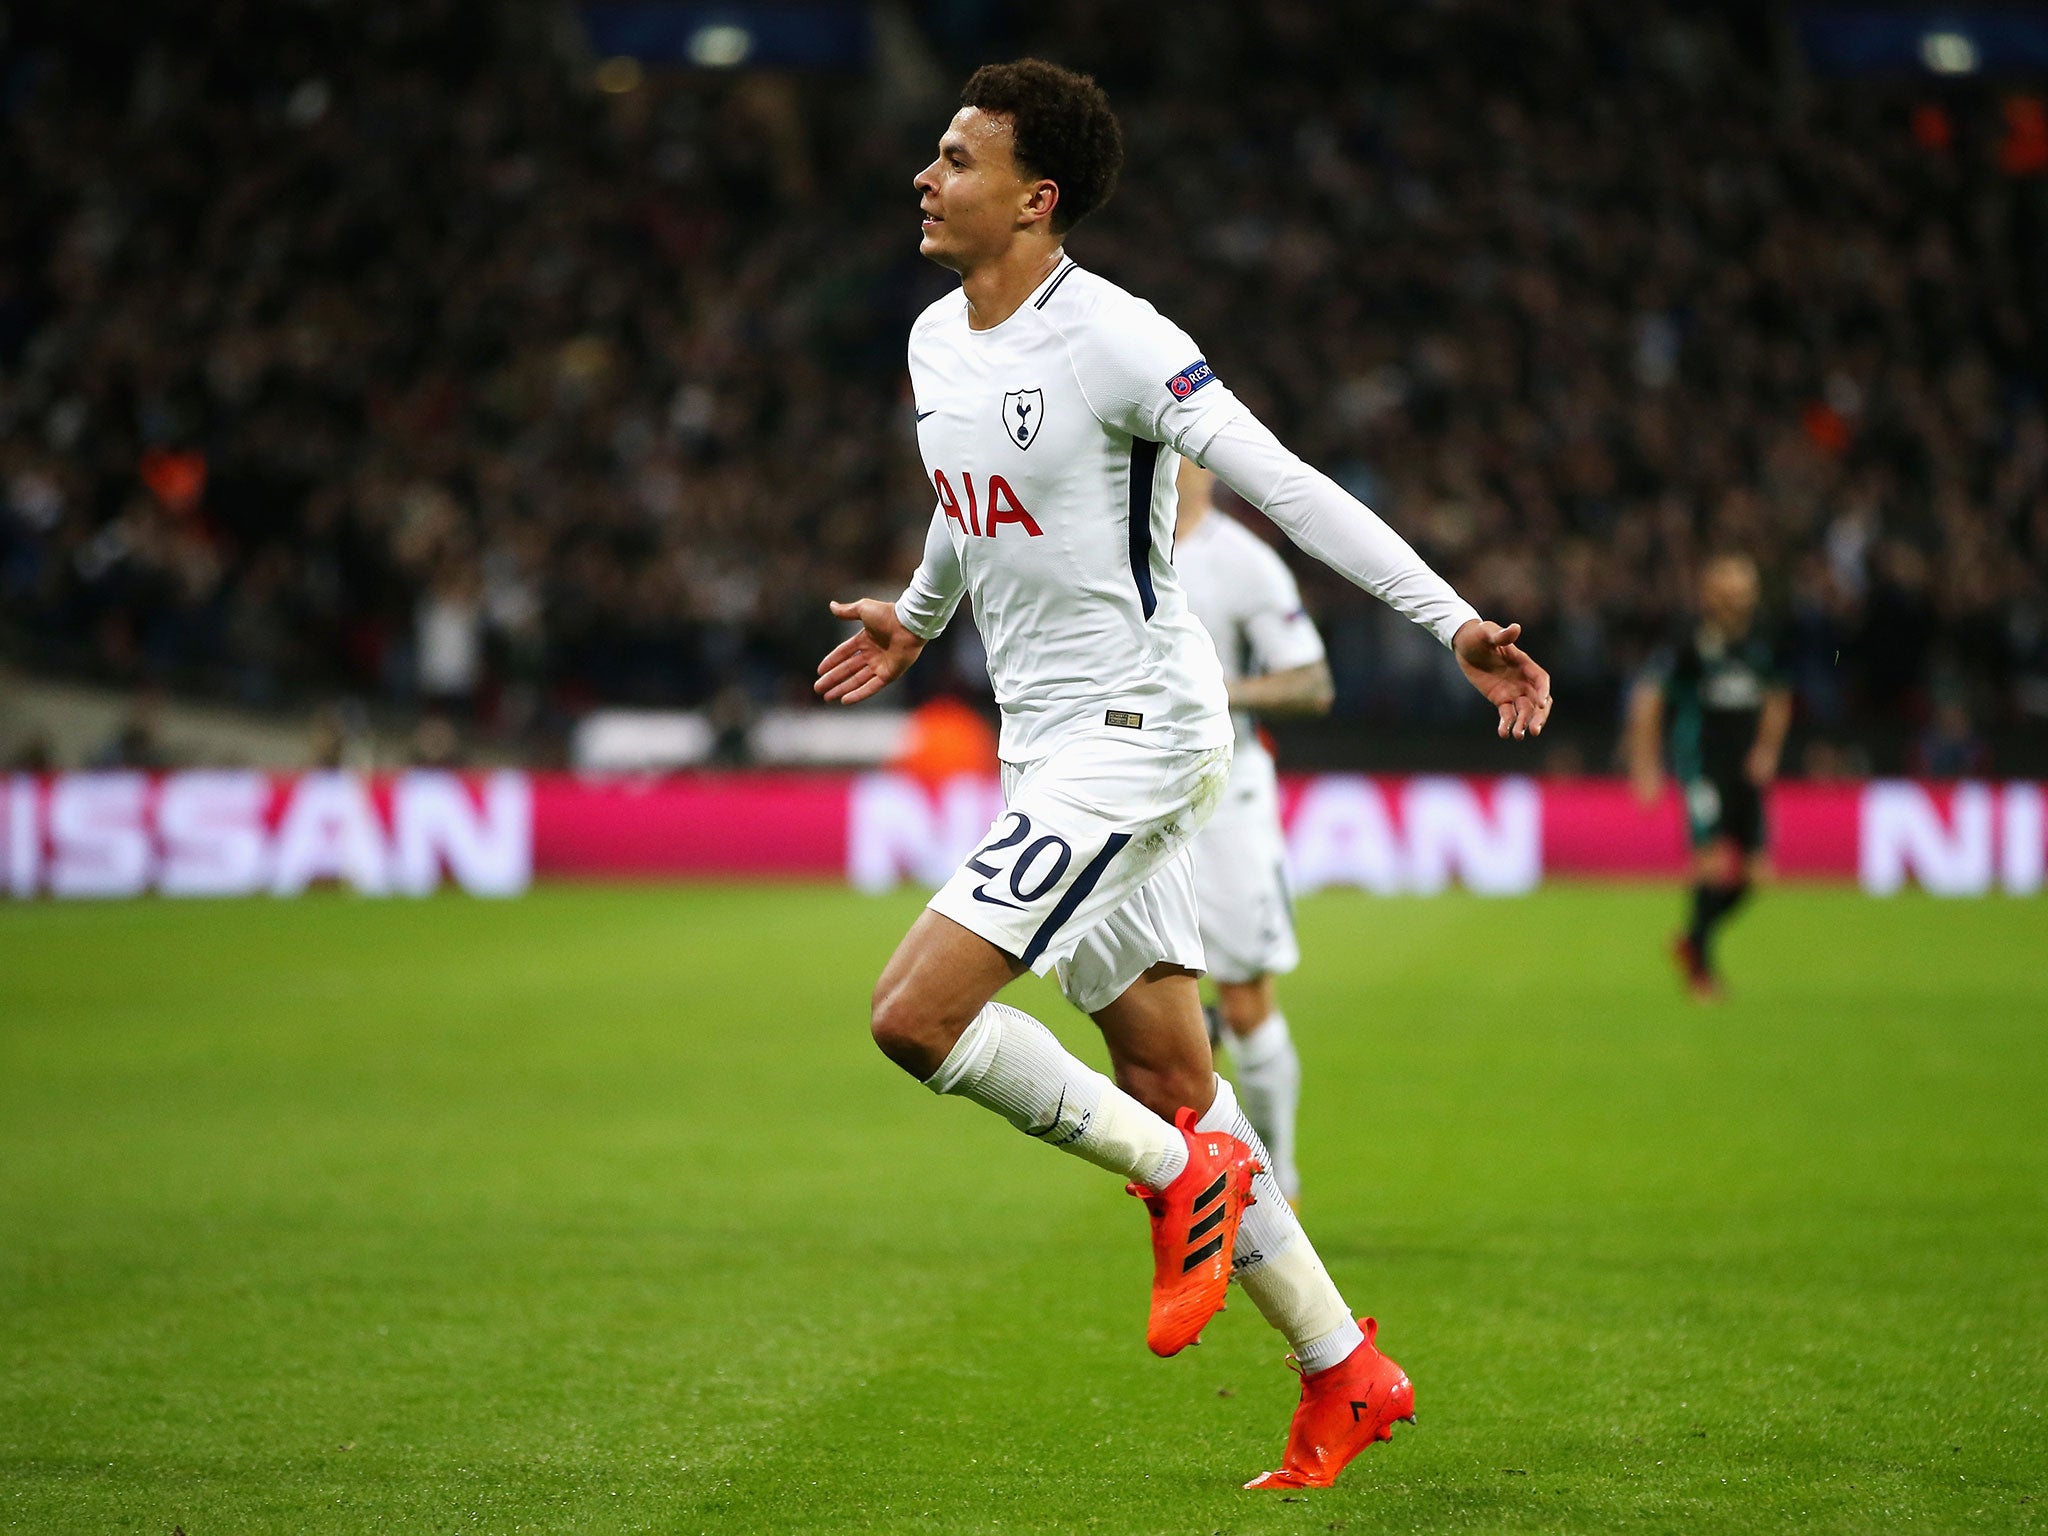 Dele Alli celebrates doubling the lead for Tottenham at Wembley